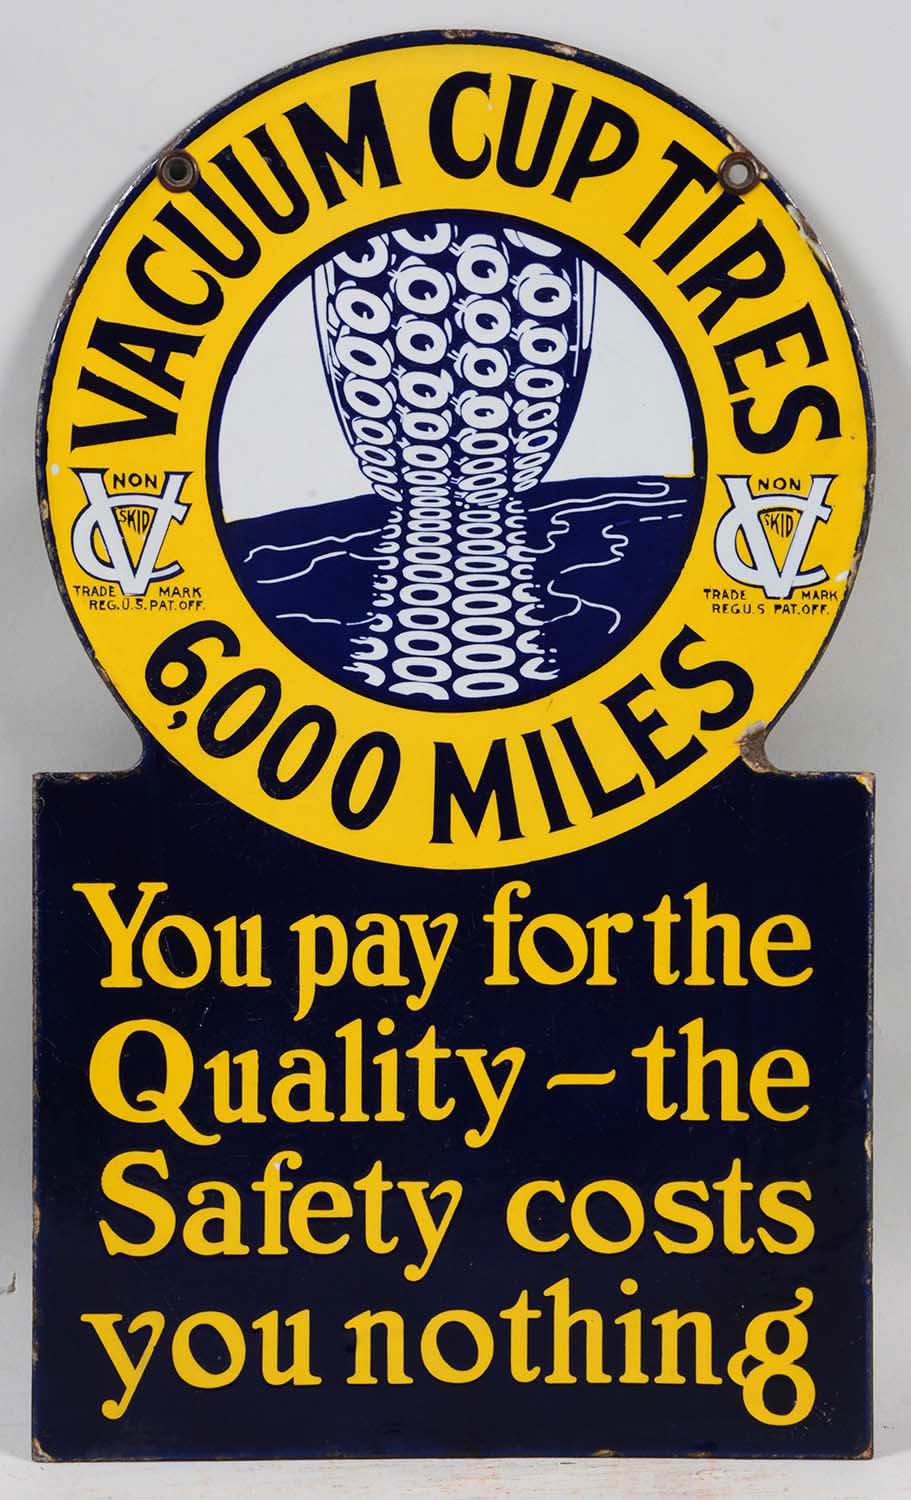 Vacuum Cup Tires Porcelain Keyhole Sign, estimated at $6,000-9,000.